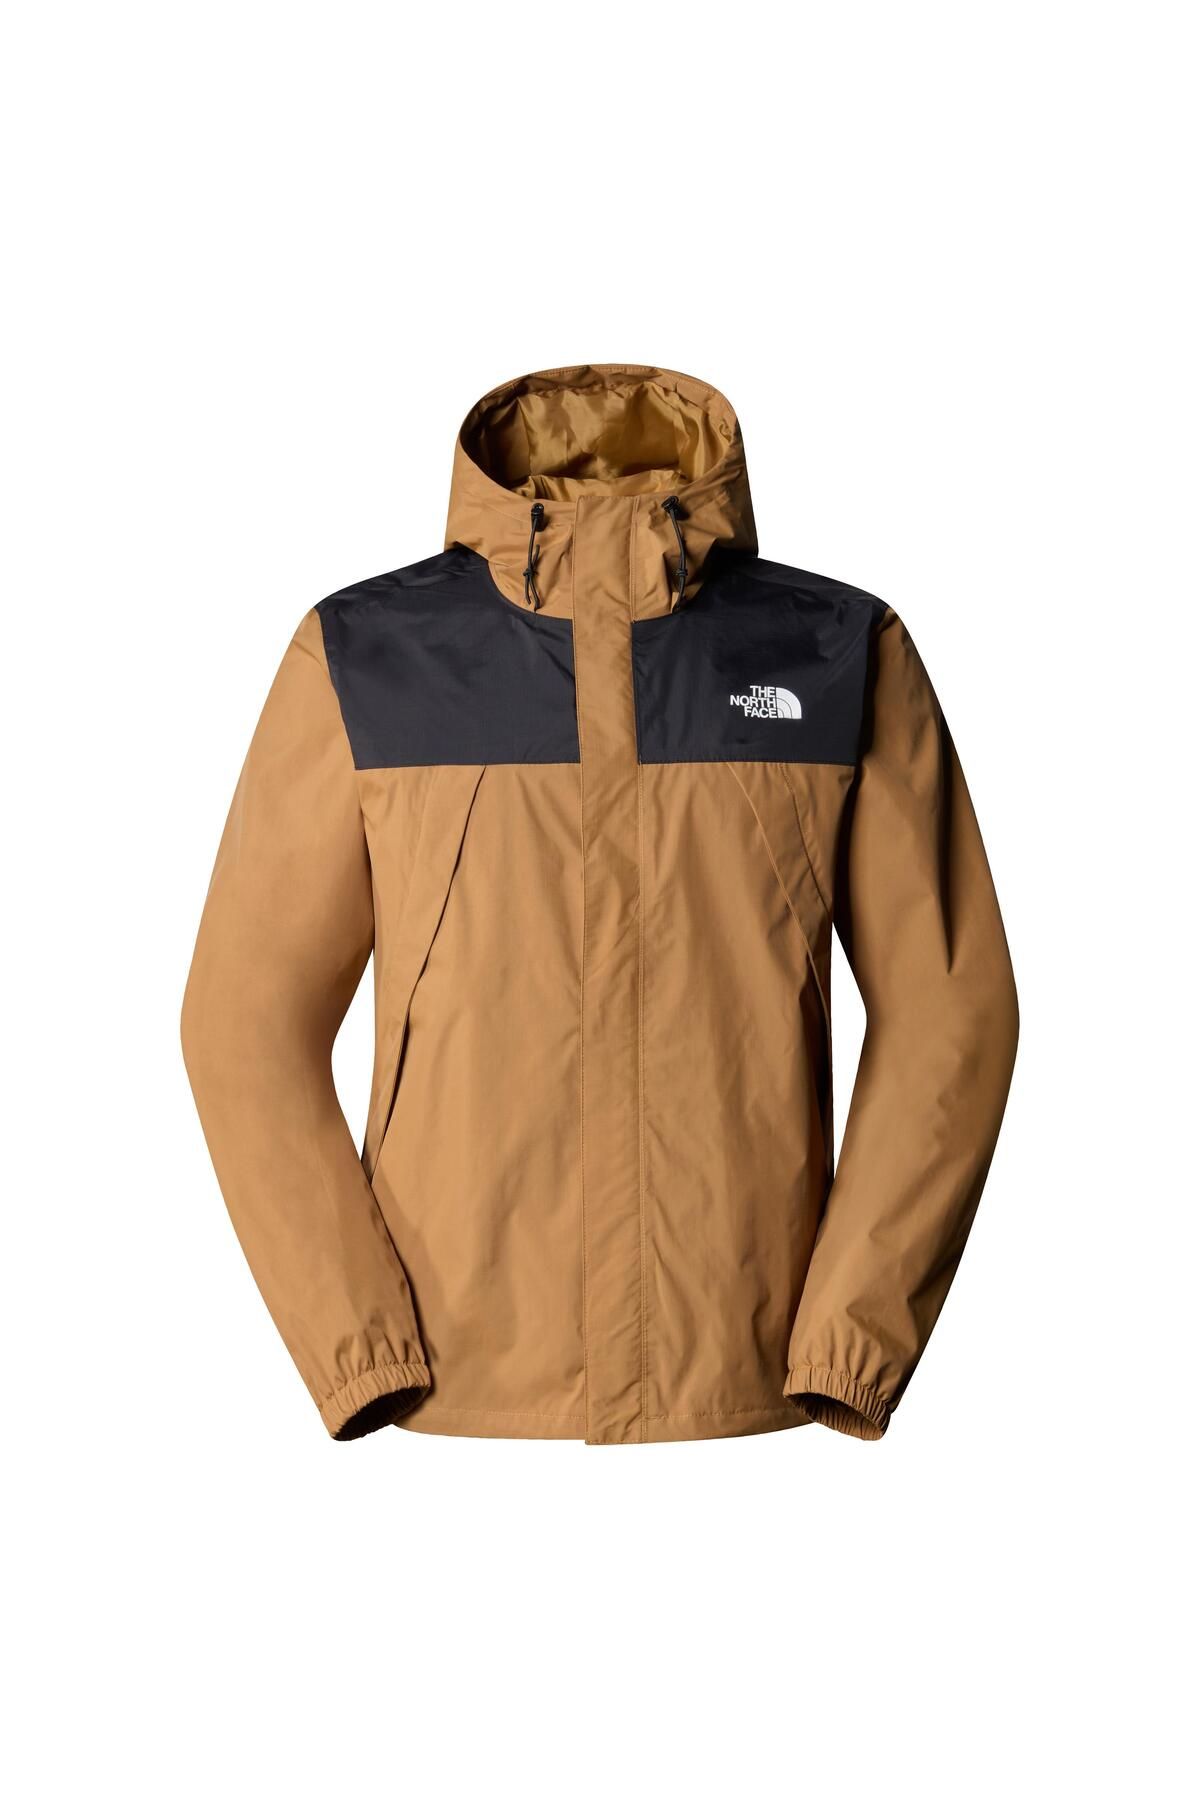 The North Face M ANTORA JACKET NF0A7QEYYW21